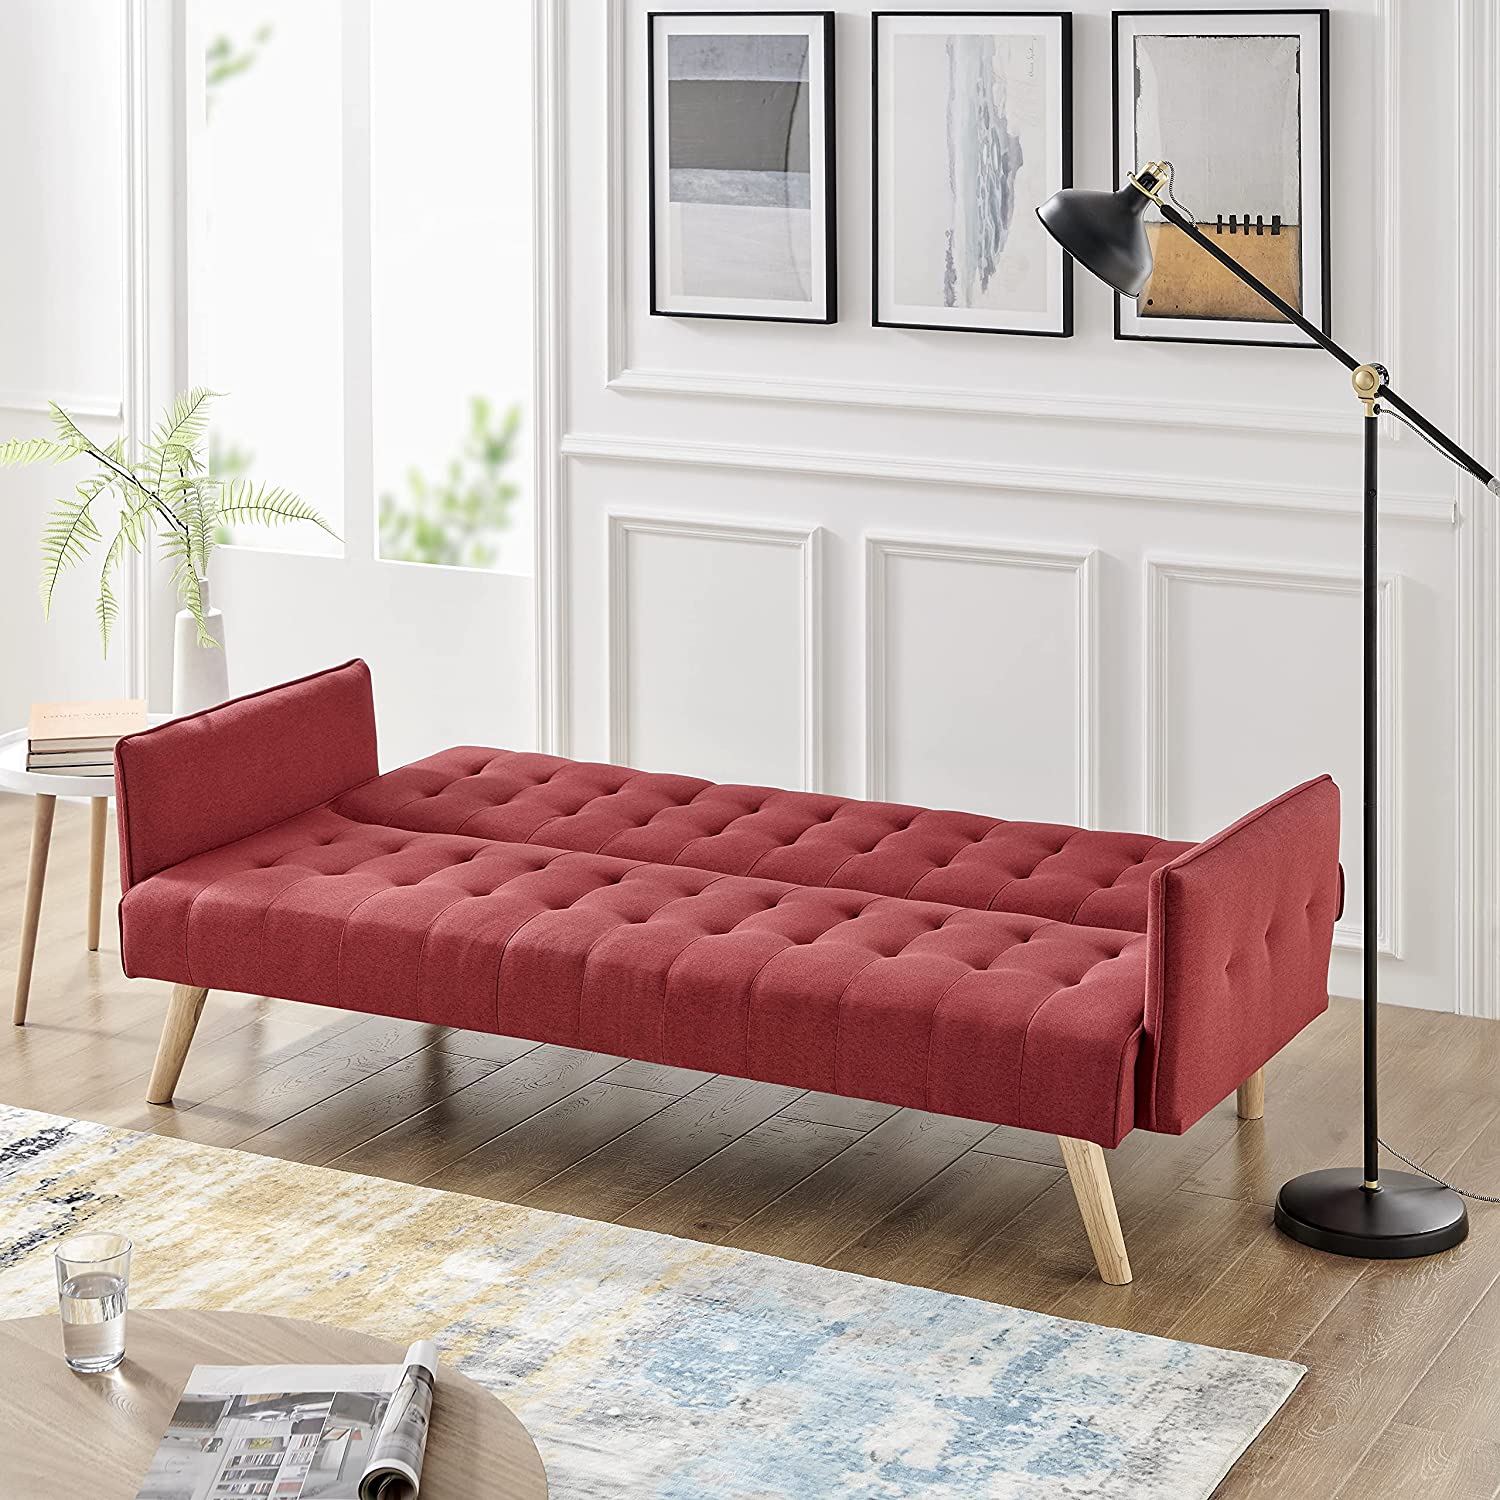 Mario 3 Seater Sofa Bed - Red